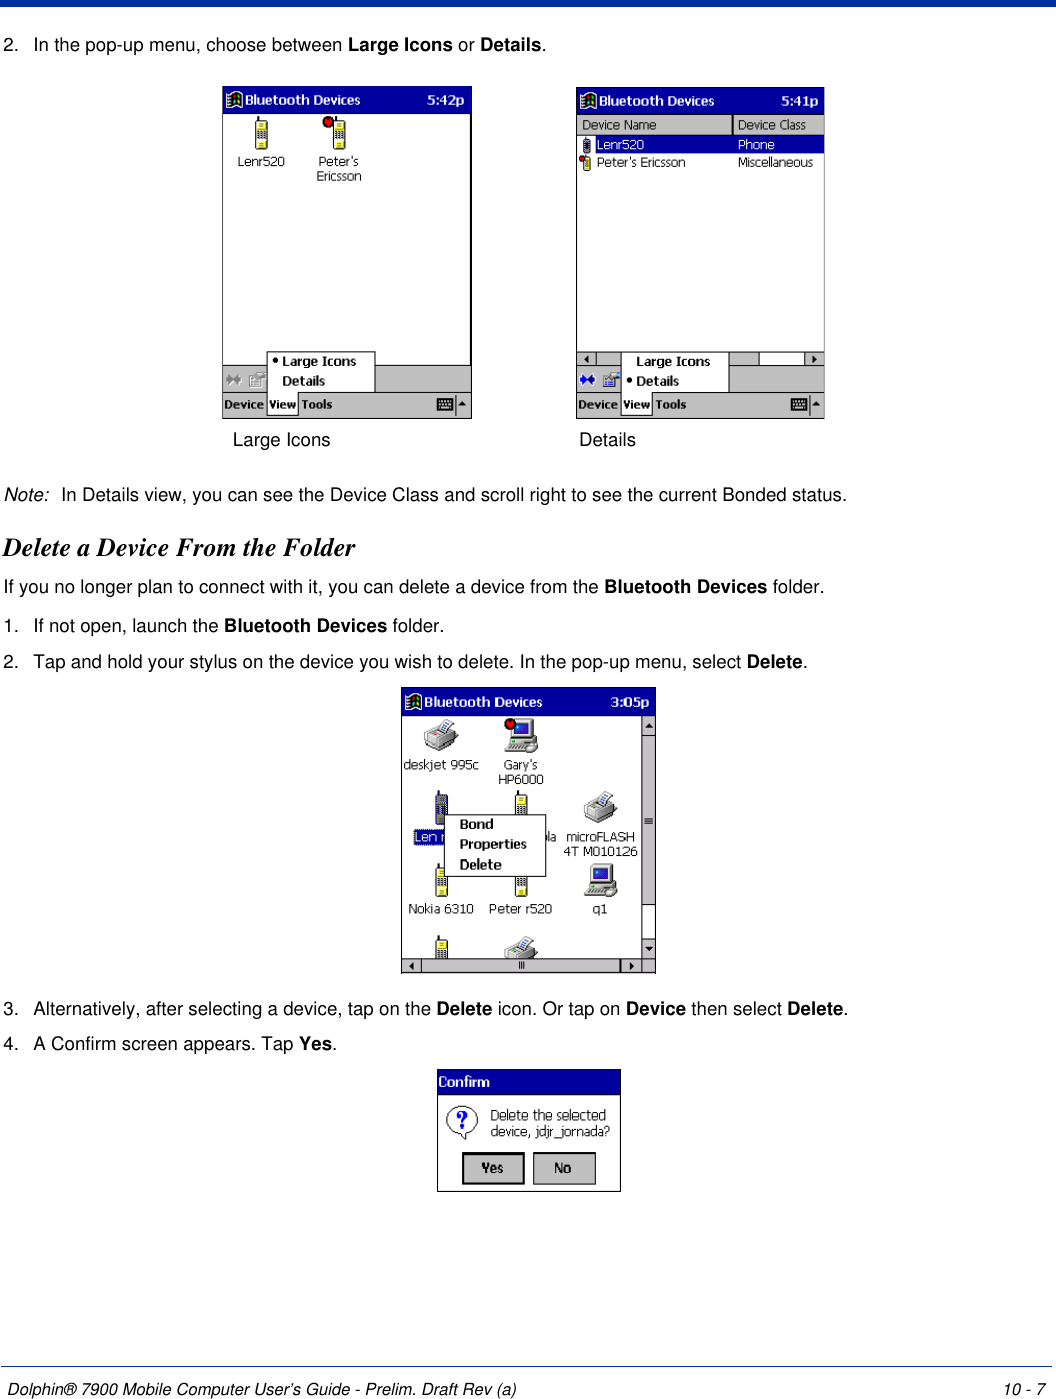 Dolphin® 7900 Mobile Computer User’s Guide - Prelim. Draft Rev (a) 10 - 72. In the pop-up menu, choose between Large Icons or Details.Note: In Details view, you can see the Device Class and scroll right to see the current Bonded status.Delete a Device From the FolderIf you no longer plan to connect with it, you can delete a device from the Bluetooth Devices folder. 1. If not open, launch the Bluetooth Devices folder.2. Tap and hold your stylus on the device you wish to delete. In the pop-up menu, select Delete.3. Alternatively, after selecting a device, tap on the Delete icon. Or tap on Device then select Delete.4. A Confirm screen appears. Tap Yes.Large Icons Details 